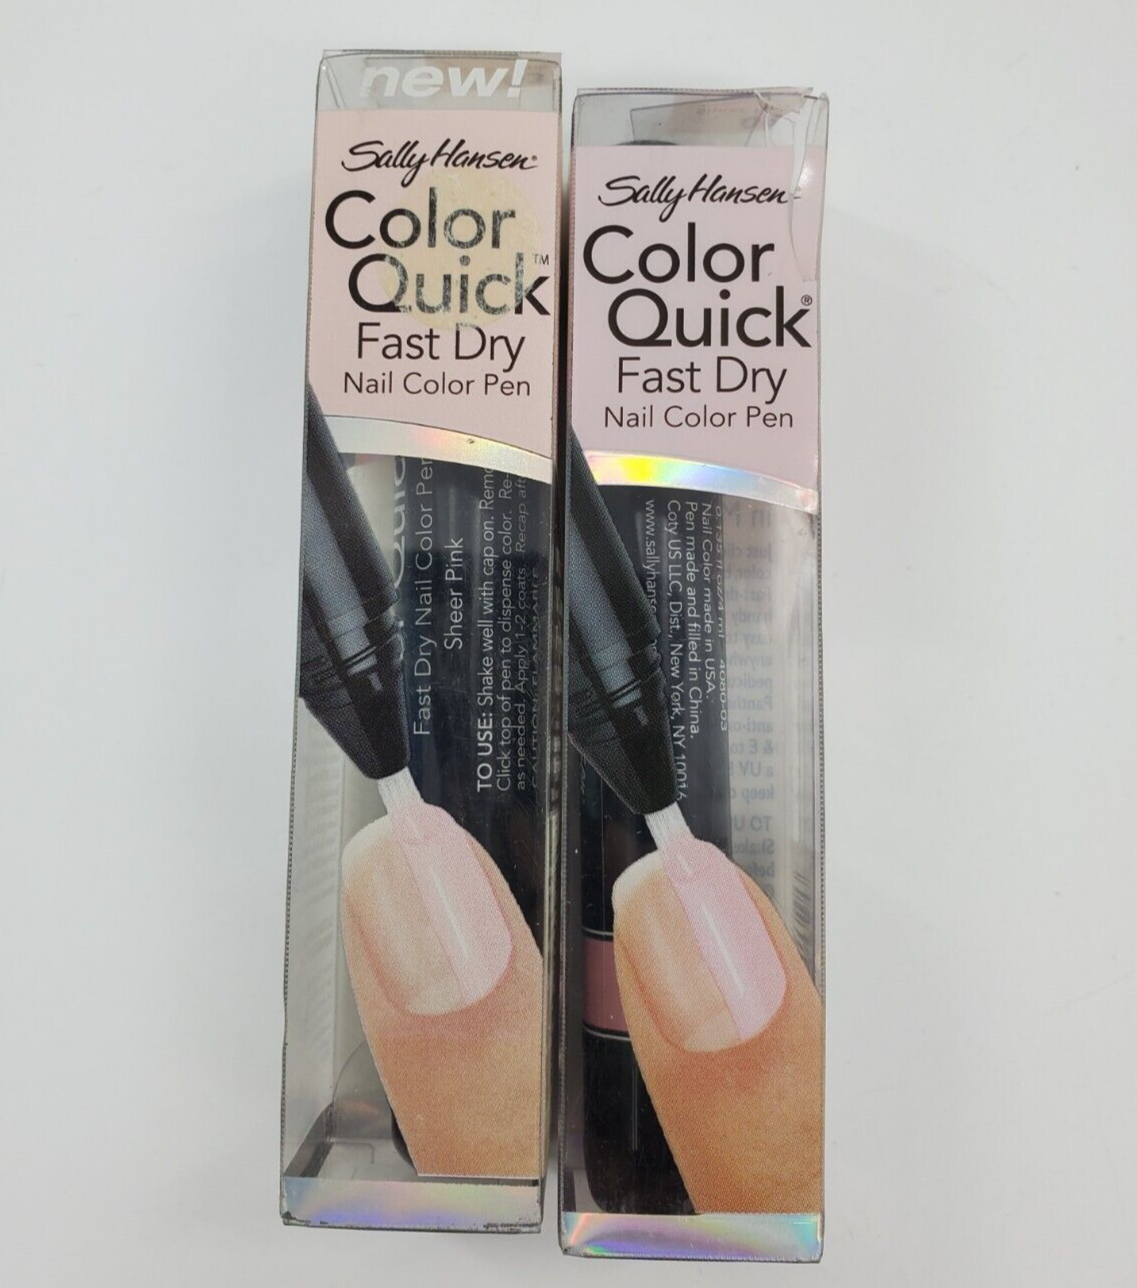 Primary image for 2X Sally Hansen Color Quick Fast Dry Nail Color Pens 03 Sheer Pink New